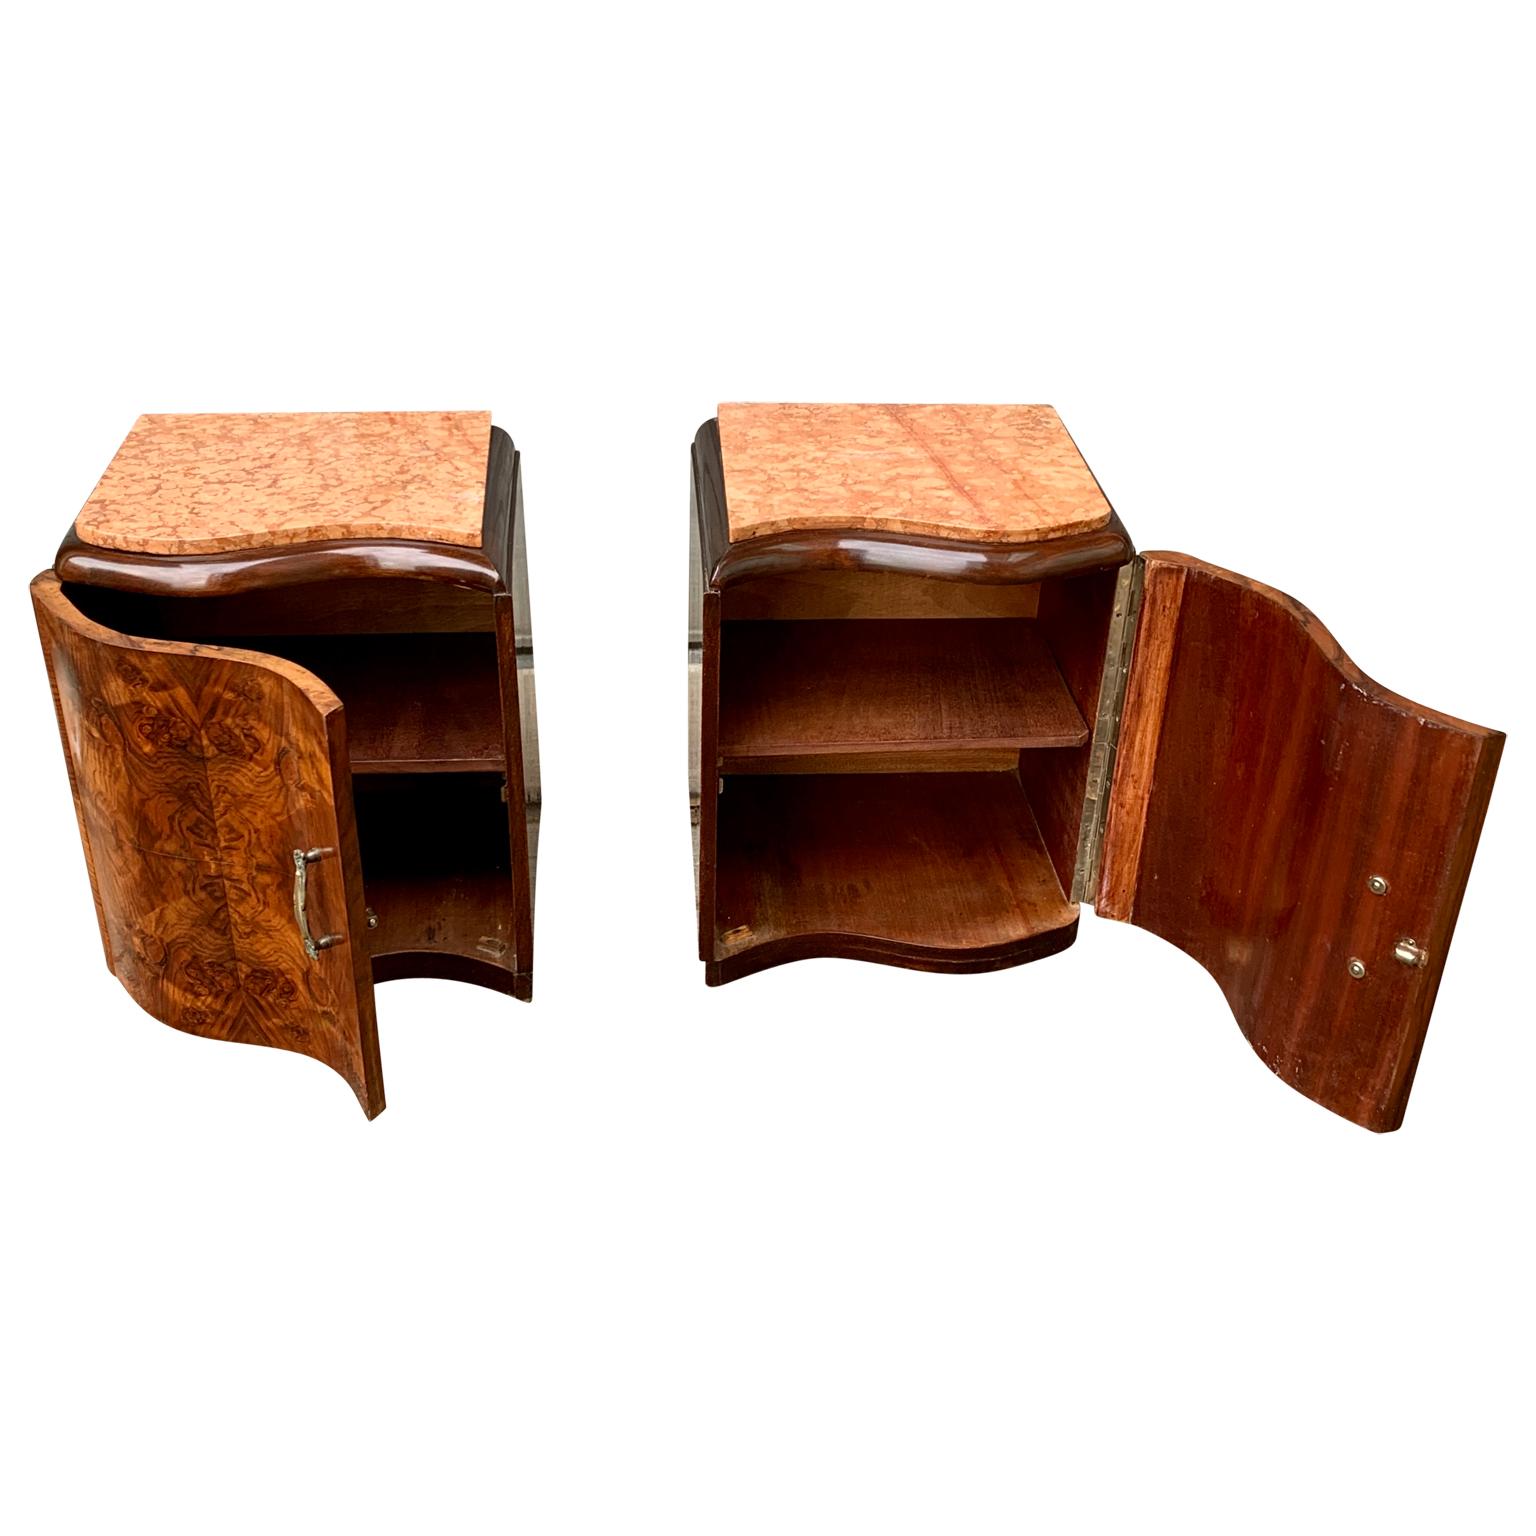 Mid-20th Century Pair of French Art Deco Nightstands in Walnut And Pink Travertine For Sale